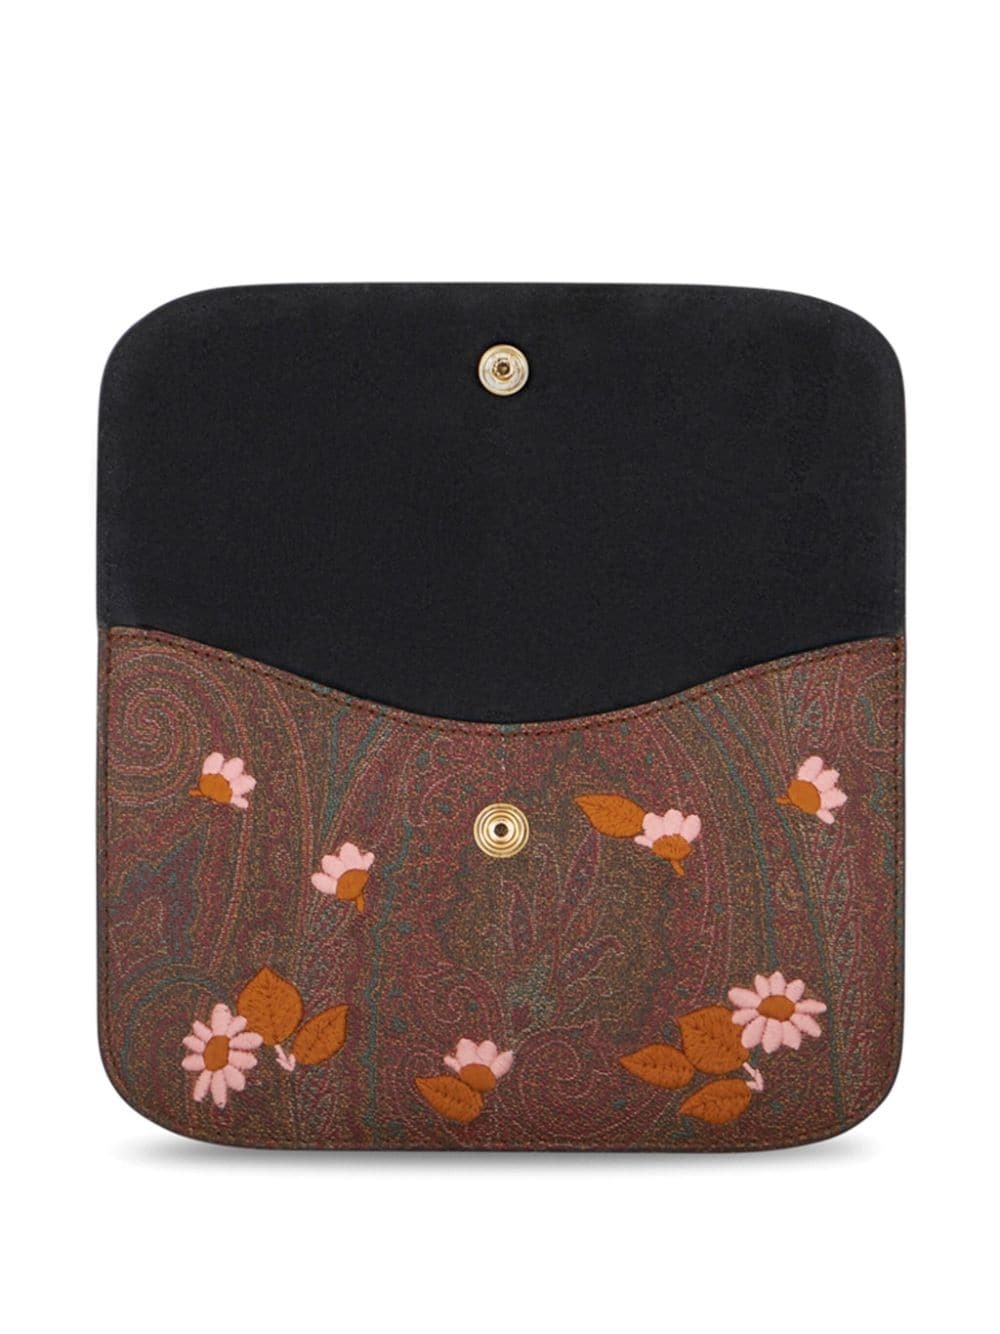 Essential embroidered purse - 4